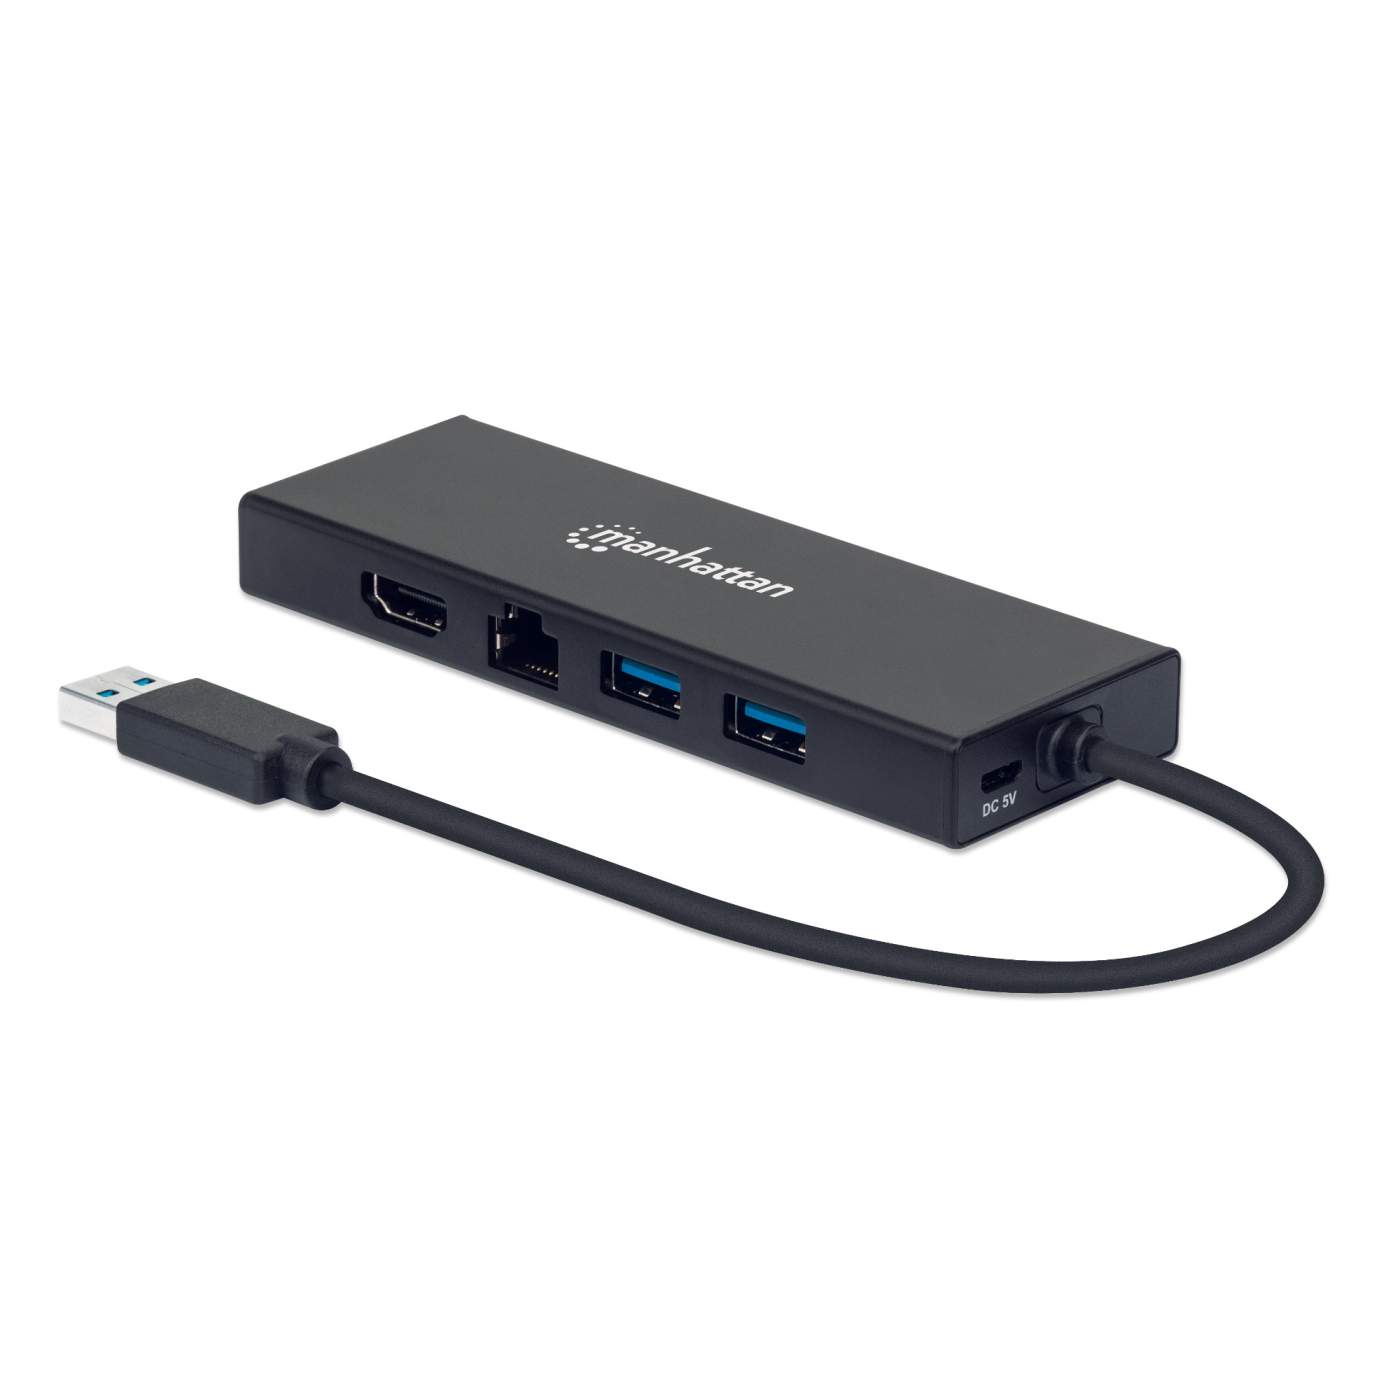 mærke navn volleyball forholdsord Manhattan SuperSpeed USB Dual Monitor Multiport Adapter (152846)